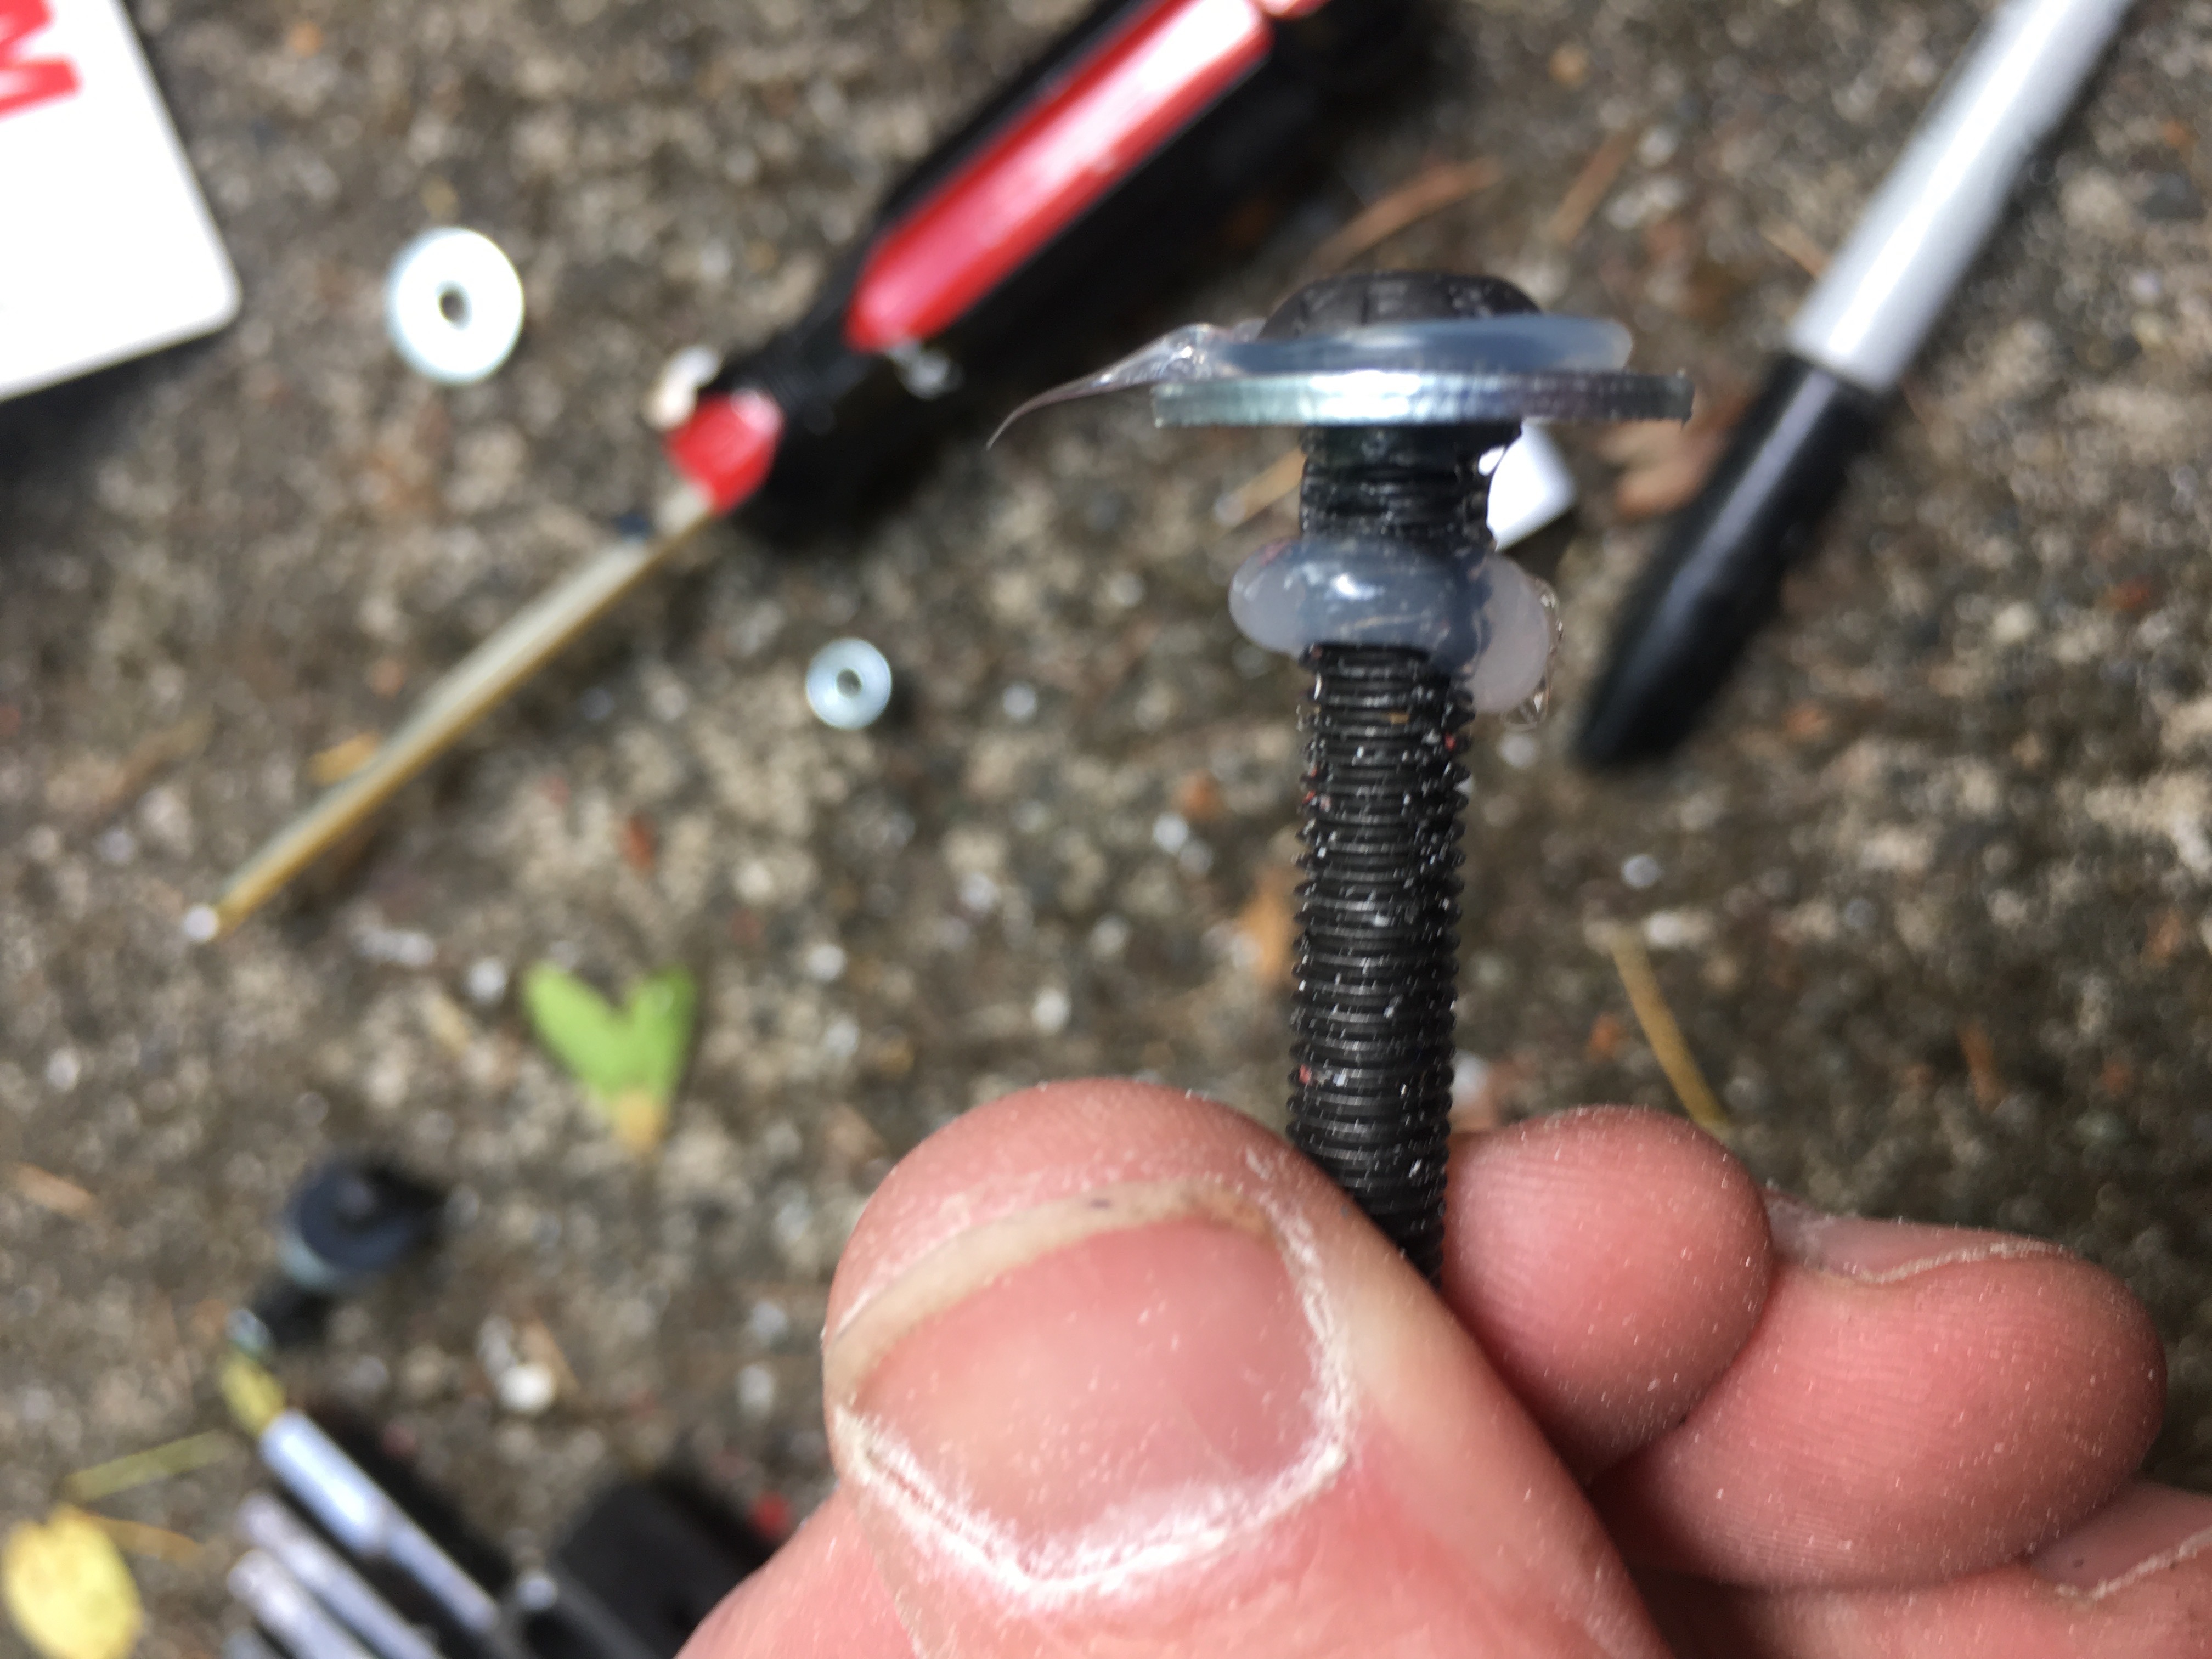 Silicone on the bolt prior to insertion